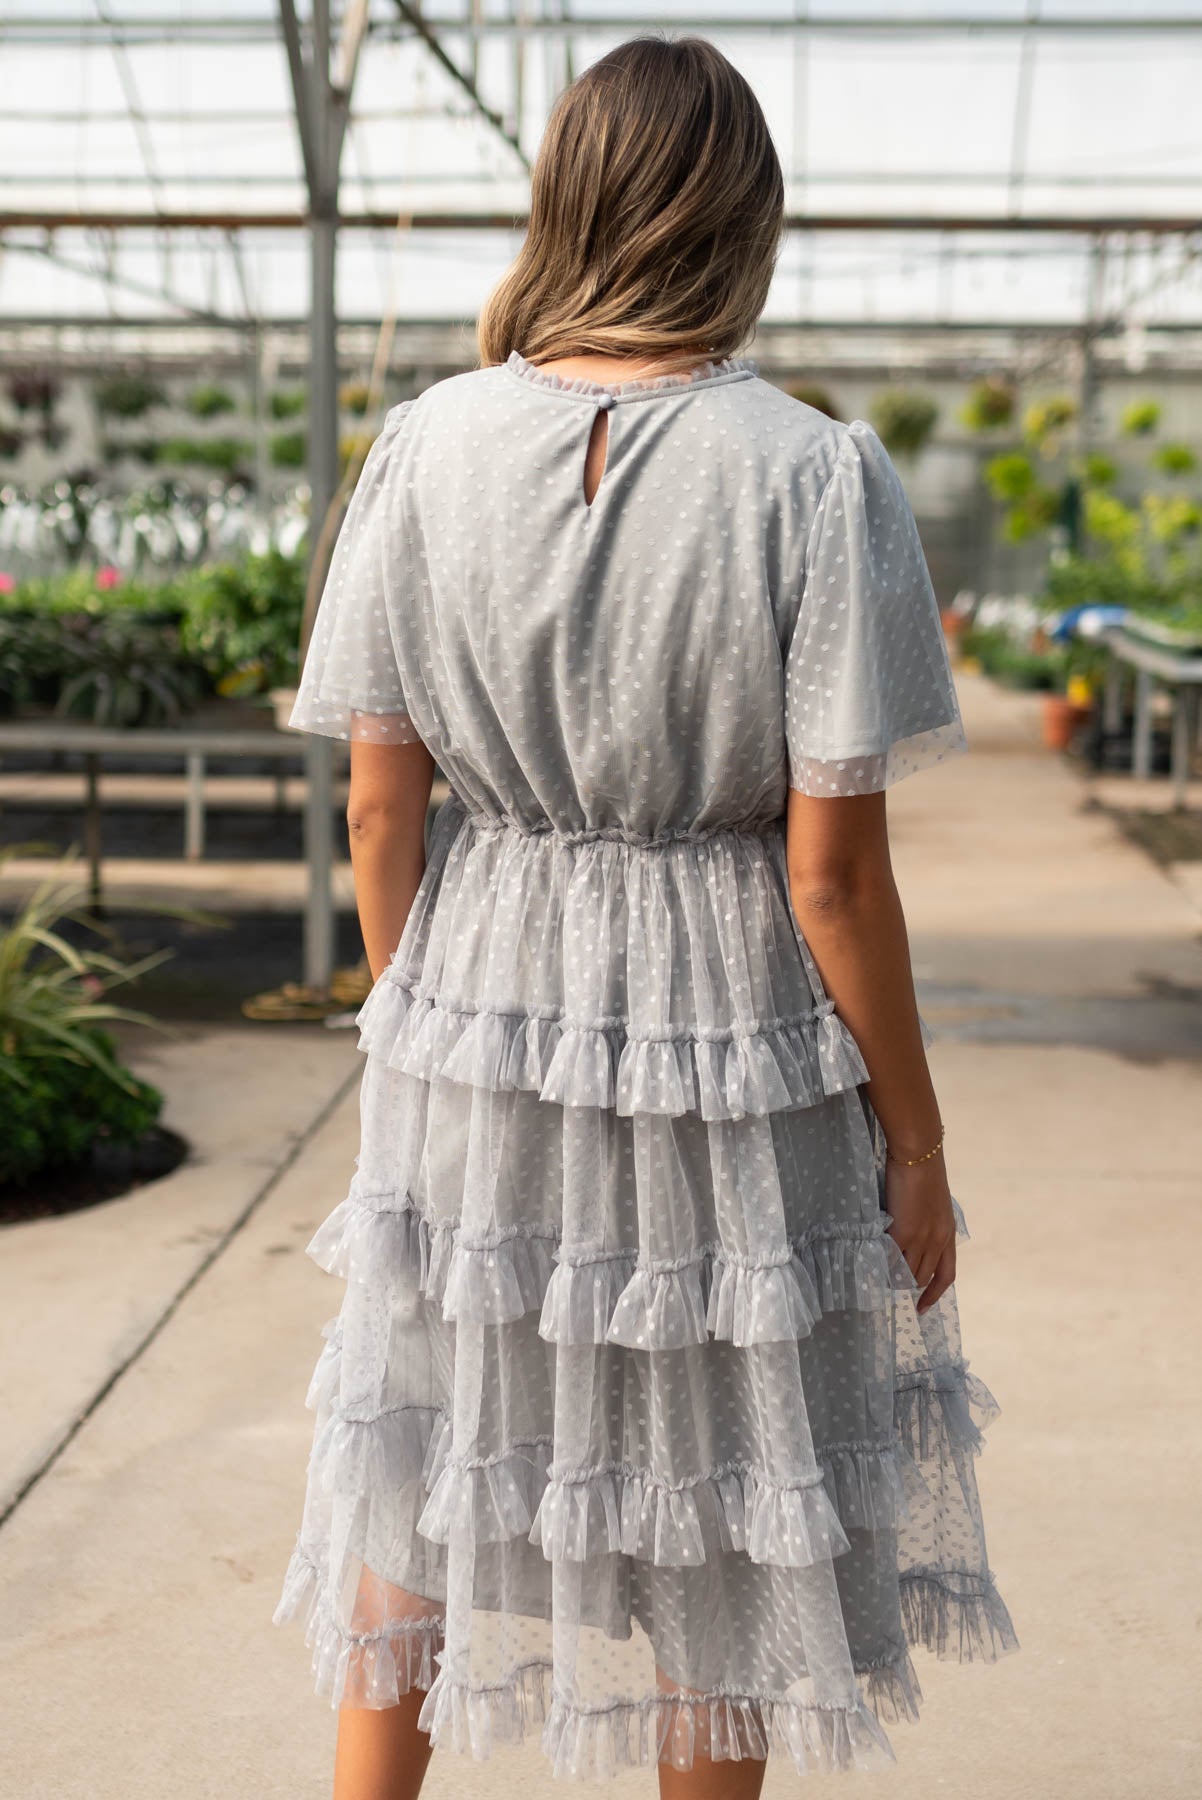 Back view of the grey blue ruffle dress